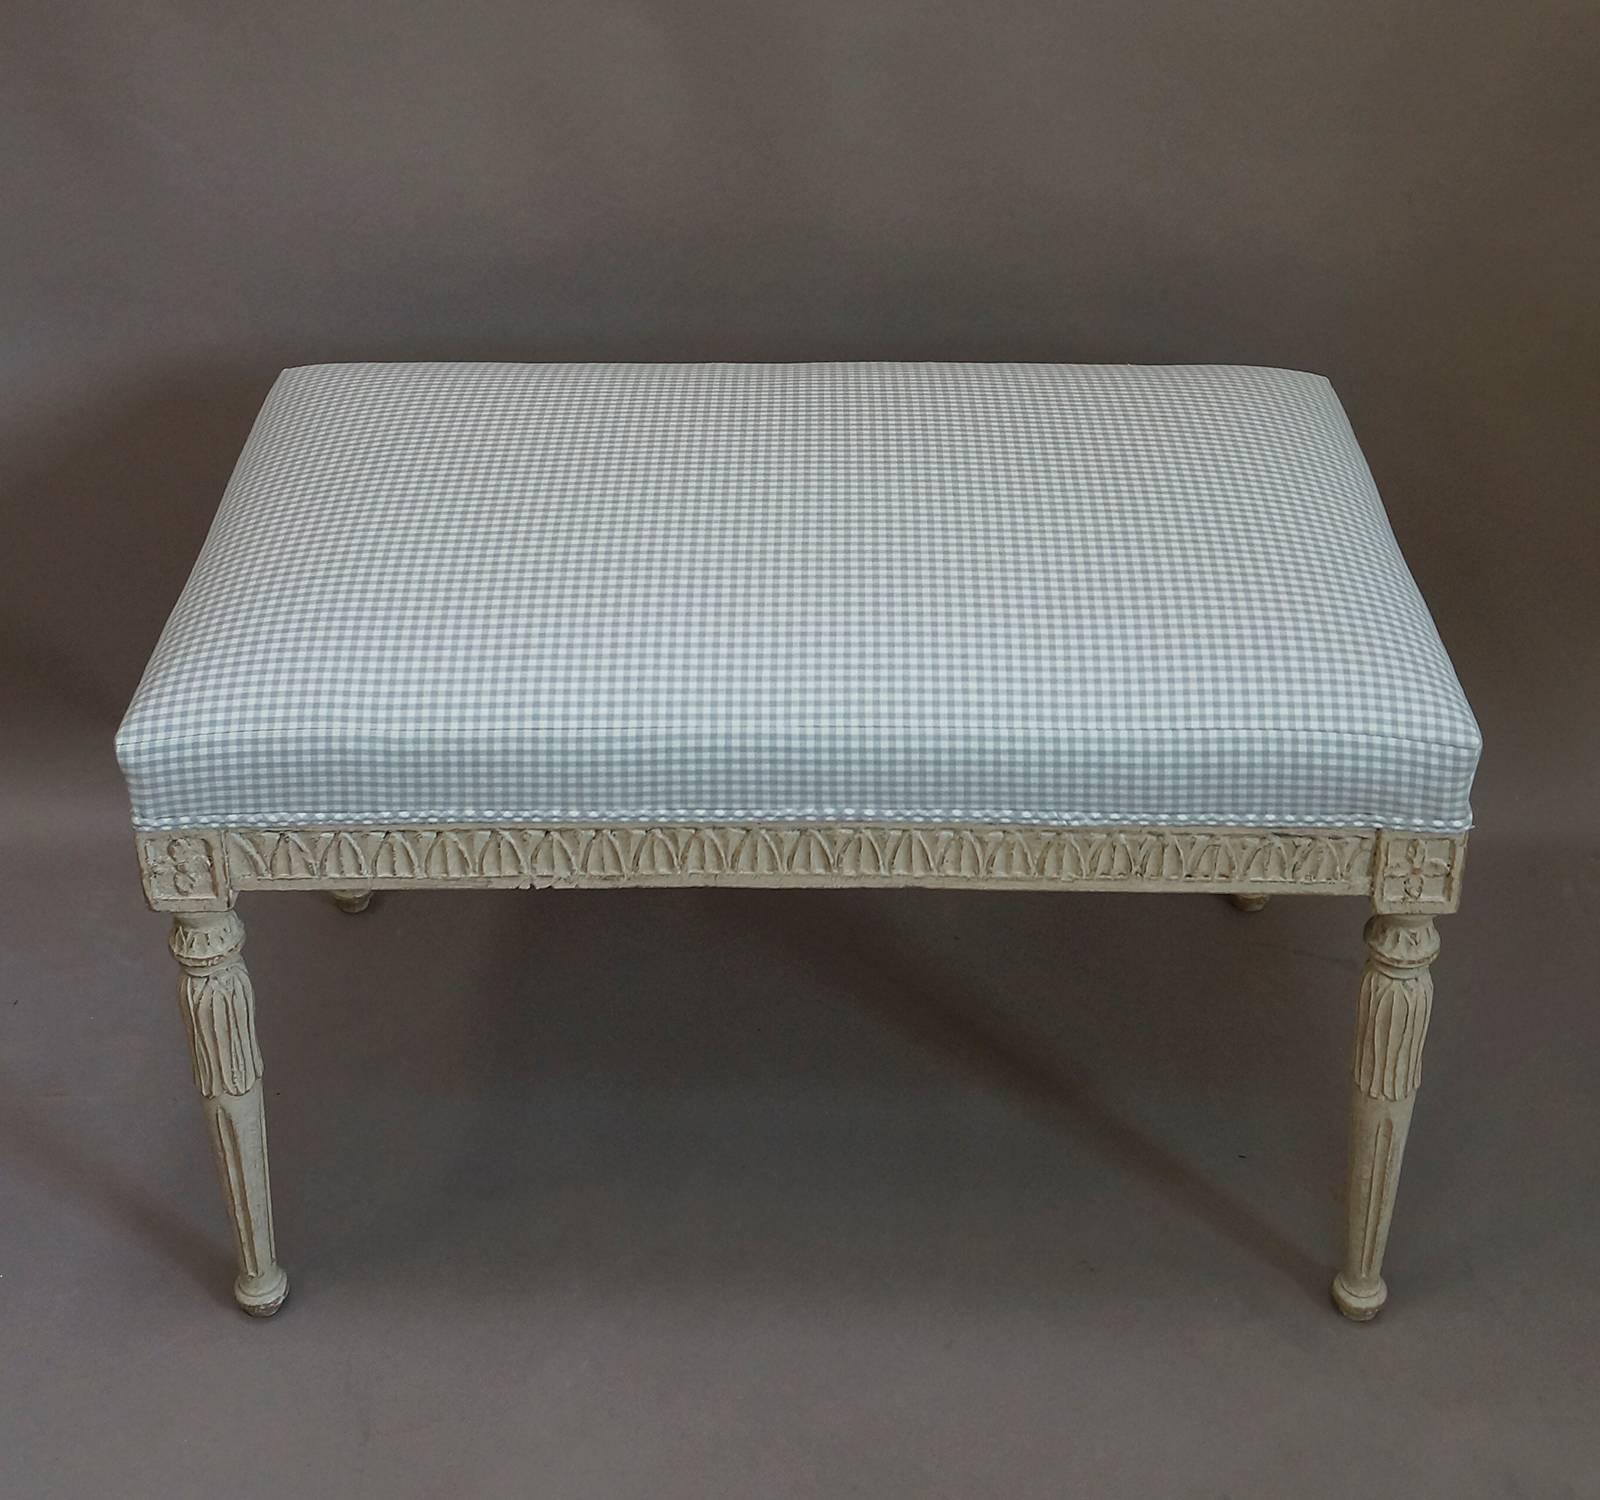 Carved Swedish bench in the Gustavian Style, circa 1850. Lamb’s tongue molding on the apron with florets at the corner blocks. Tapering round legs with lotus blossom carving at the top. Nice crisp detail.